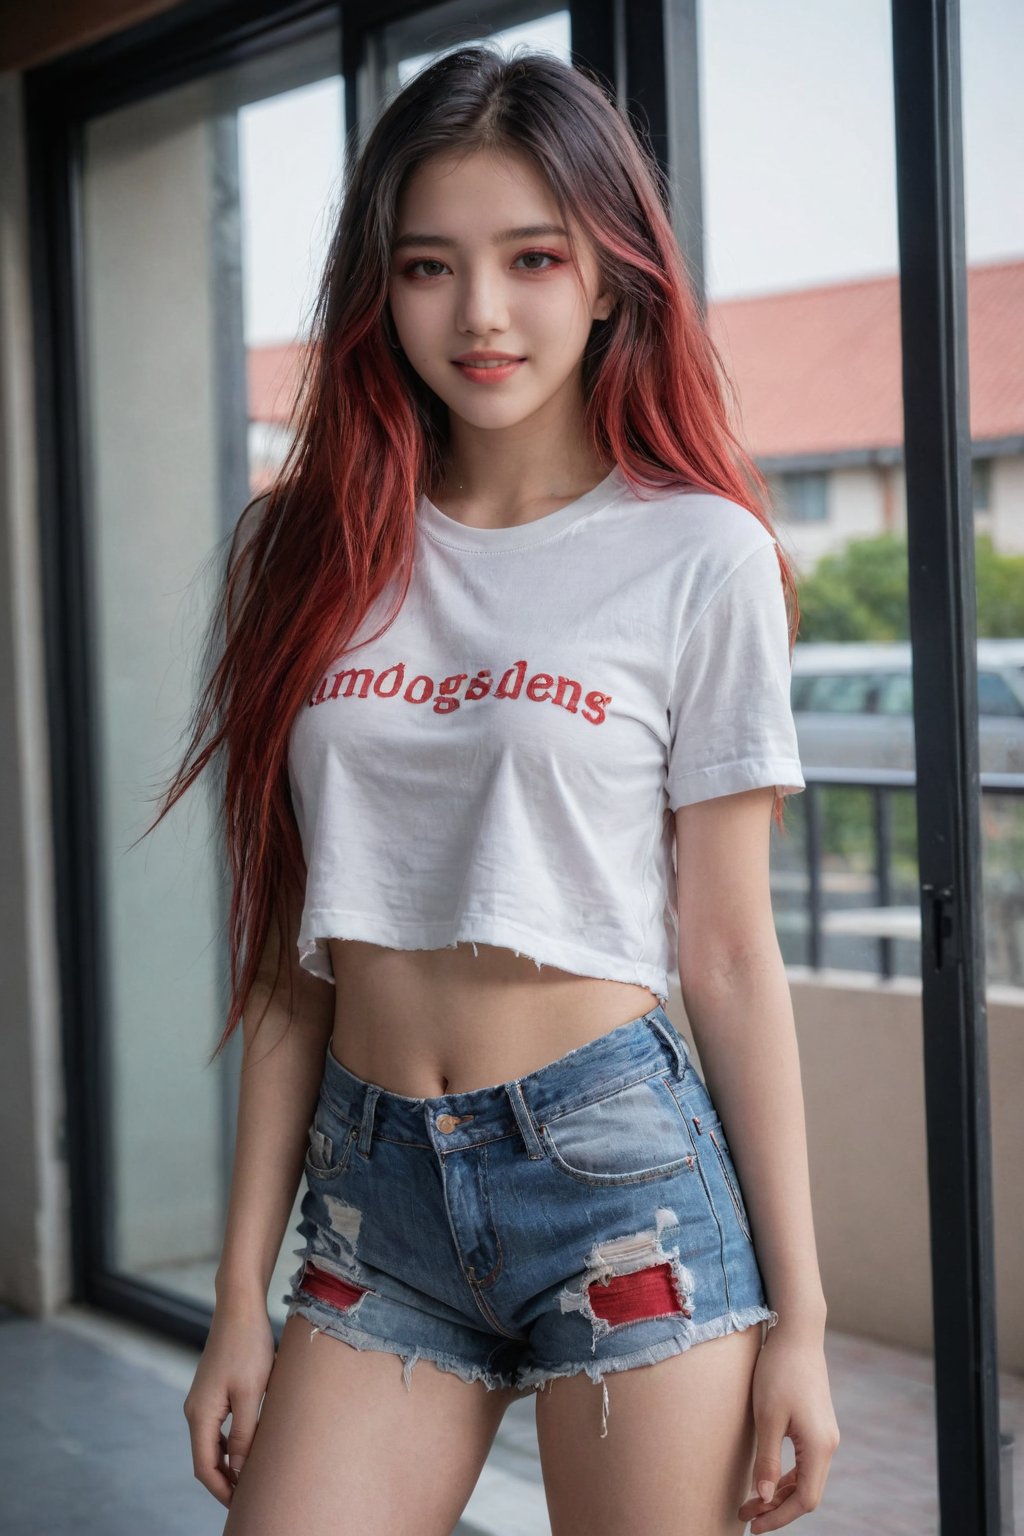  portrait of a beautiful 21yo girl, hubggirl, seductive, shadow,full body:1.8,1girl has multicolored long hair and beautiful detailed red eyes, She's winking and smile at the camera. It's ambiguous,
Ripped denim shorts, white sneakers, full hips,
full body portrait,best quality, masterpiece, high res, absurd res,perfect lighting, vibrant colors, intricate details,high detailed skin, 